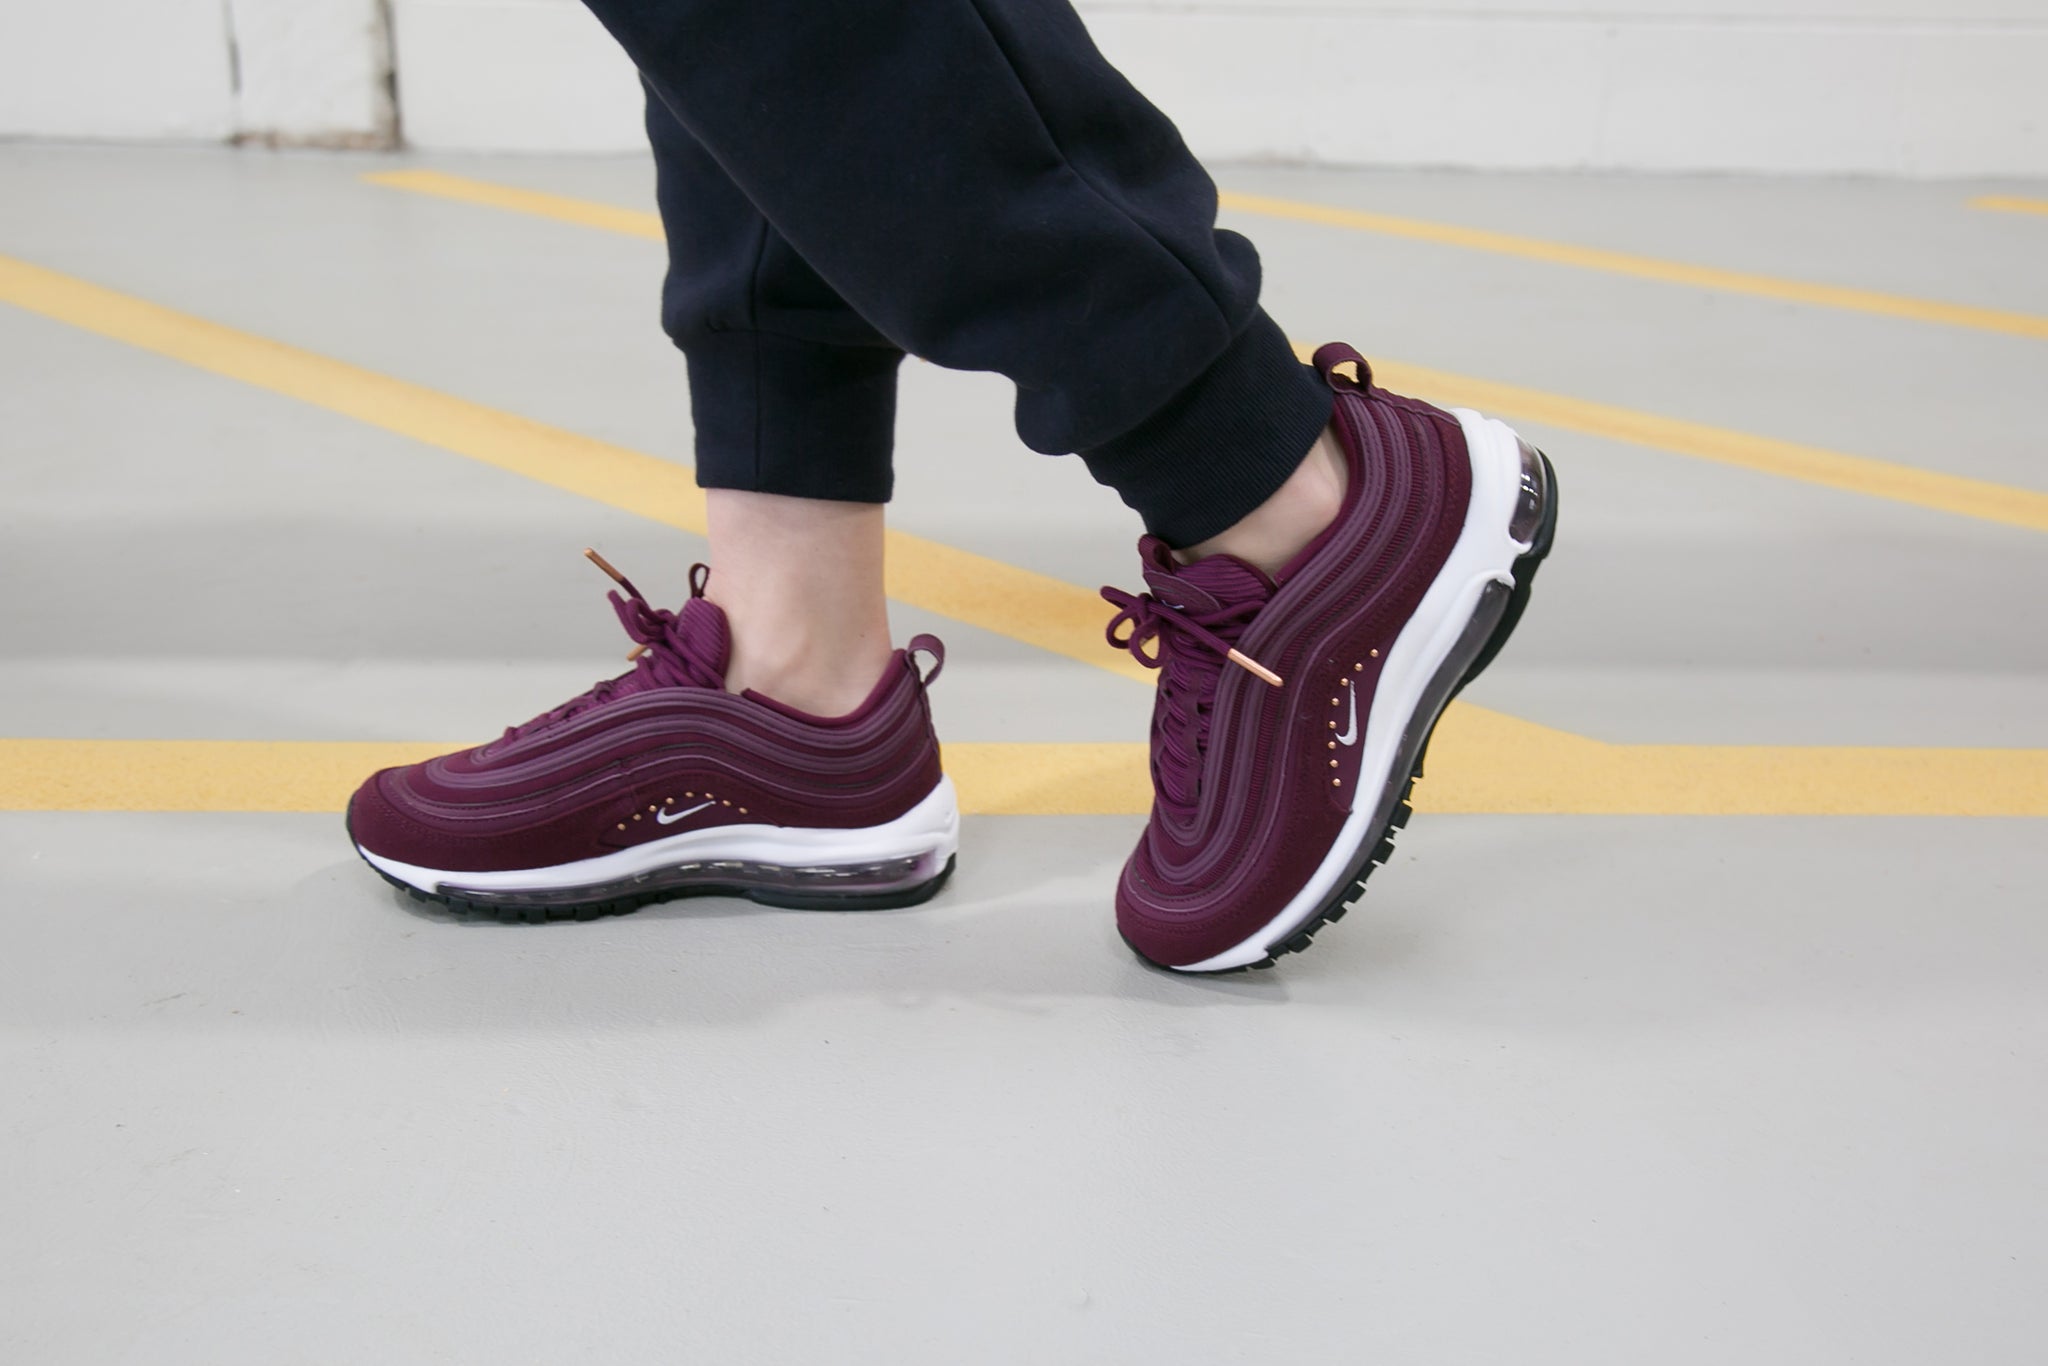 SNEAKER RELEASES | Nike Air Max 97 Special Edition Bordeaux | June 21st